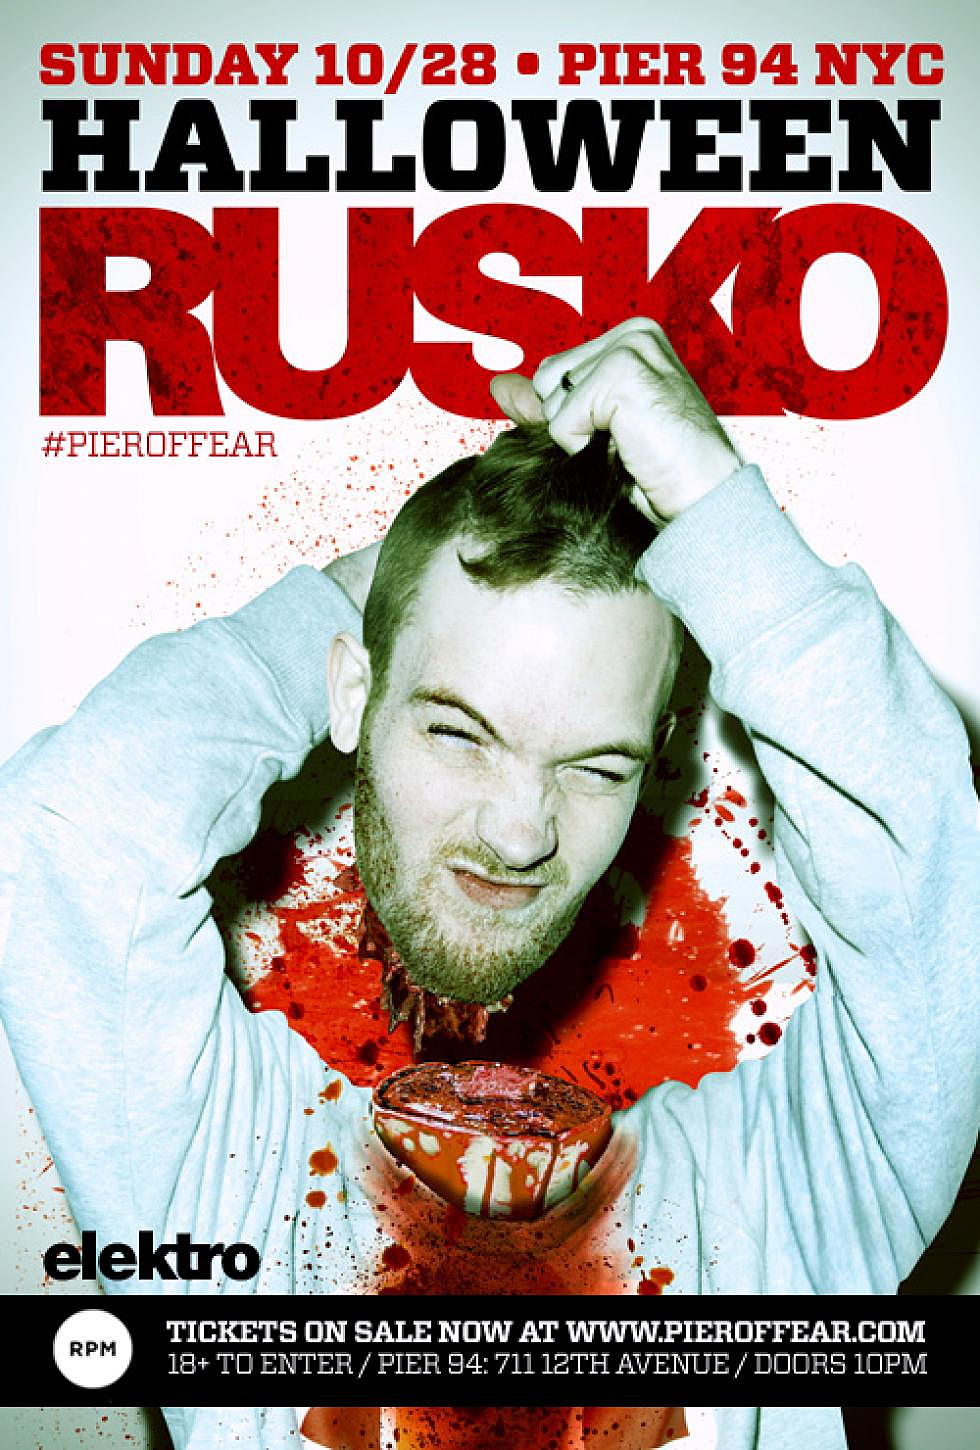 Spend Halloween with Rusko at Pier 94 + Discount Code